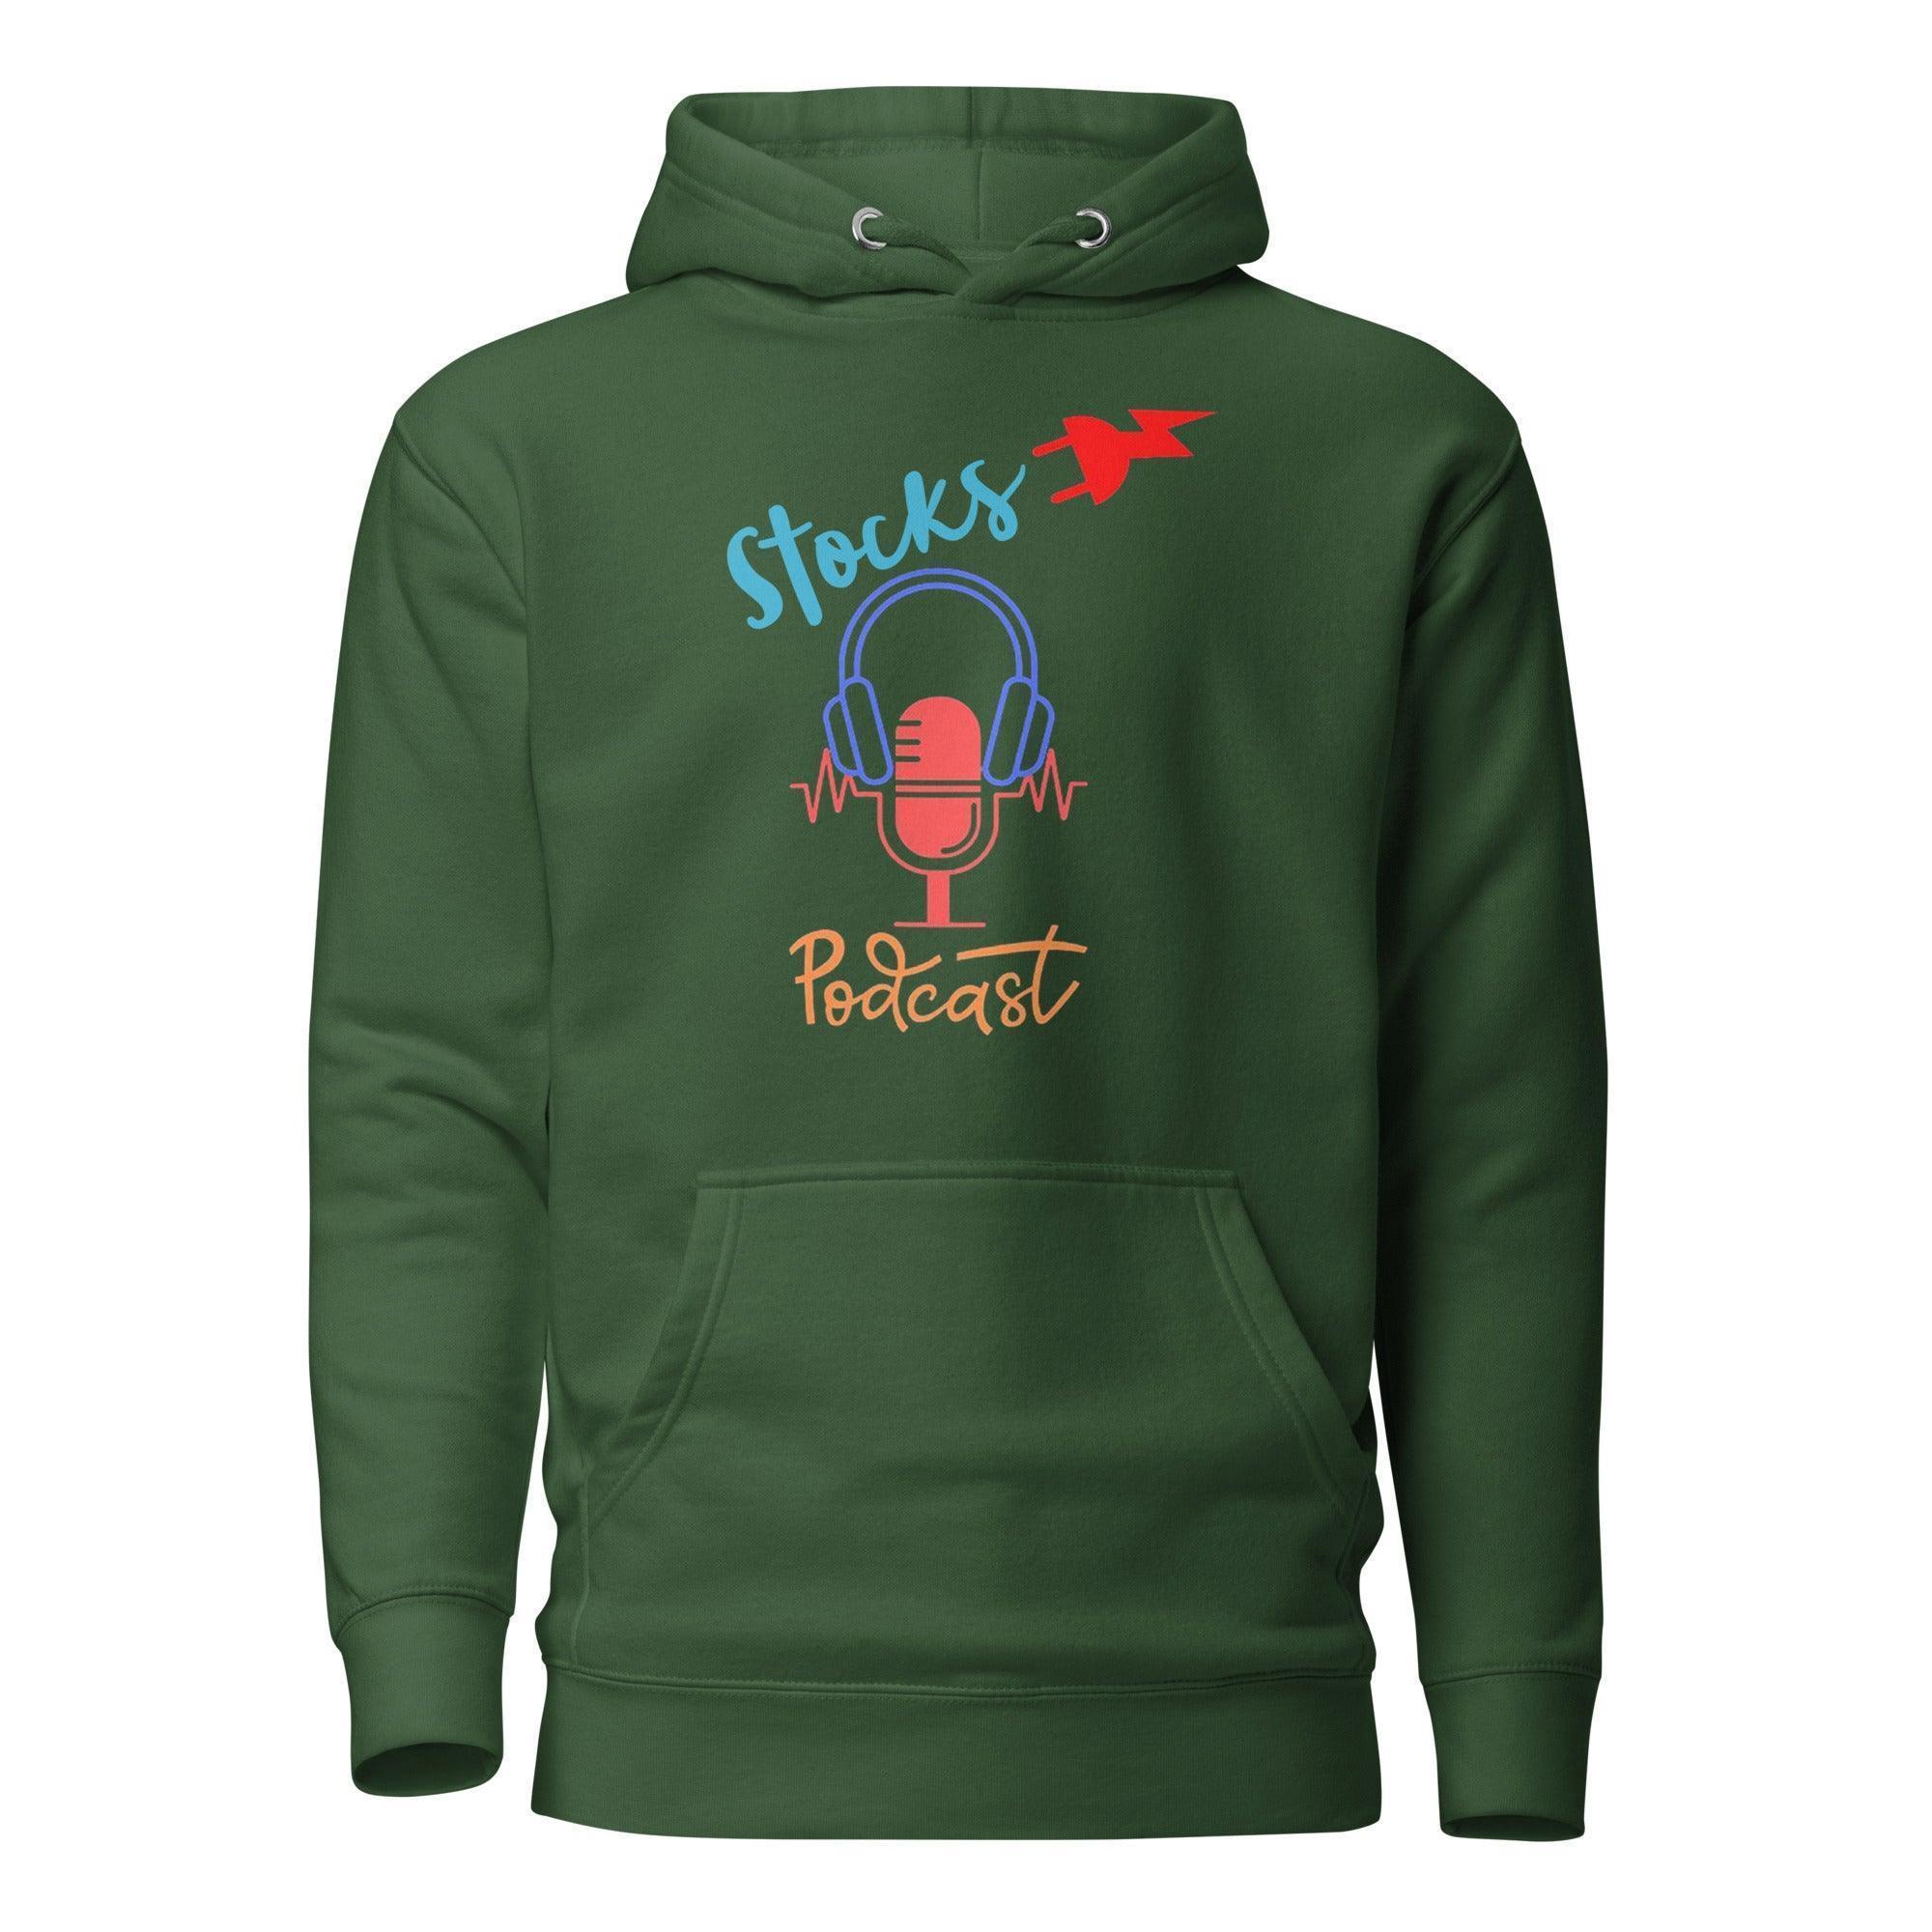 Stocks Podcast Pullover Hoodie - InvestmenTees